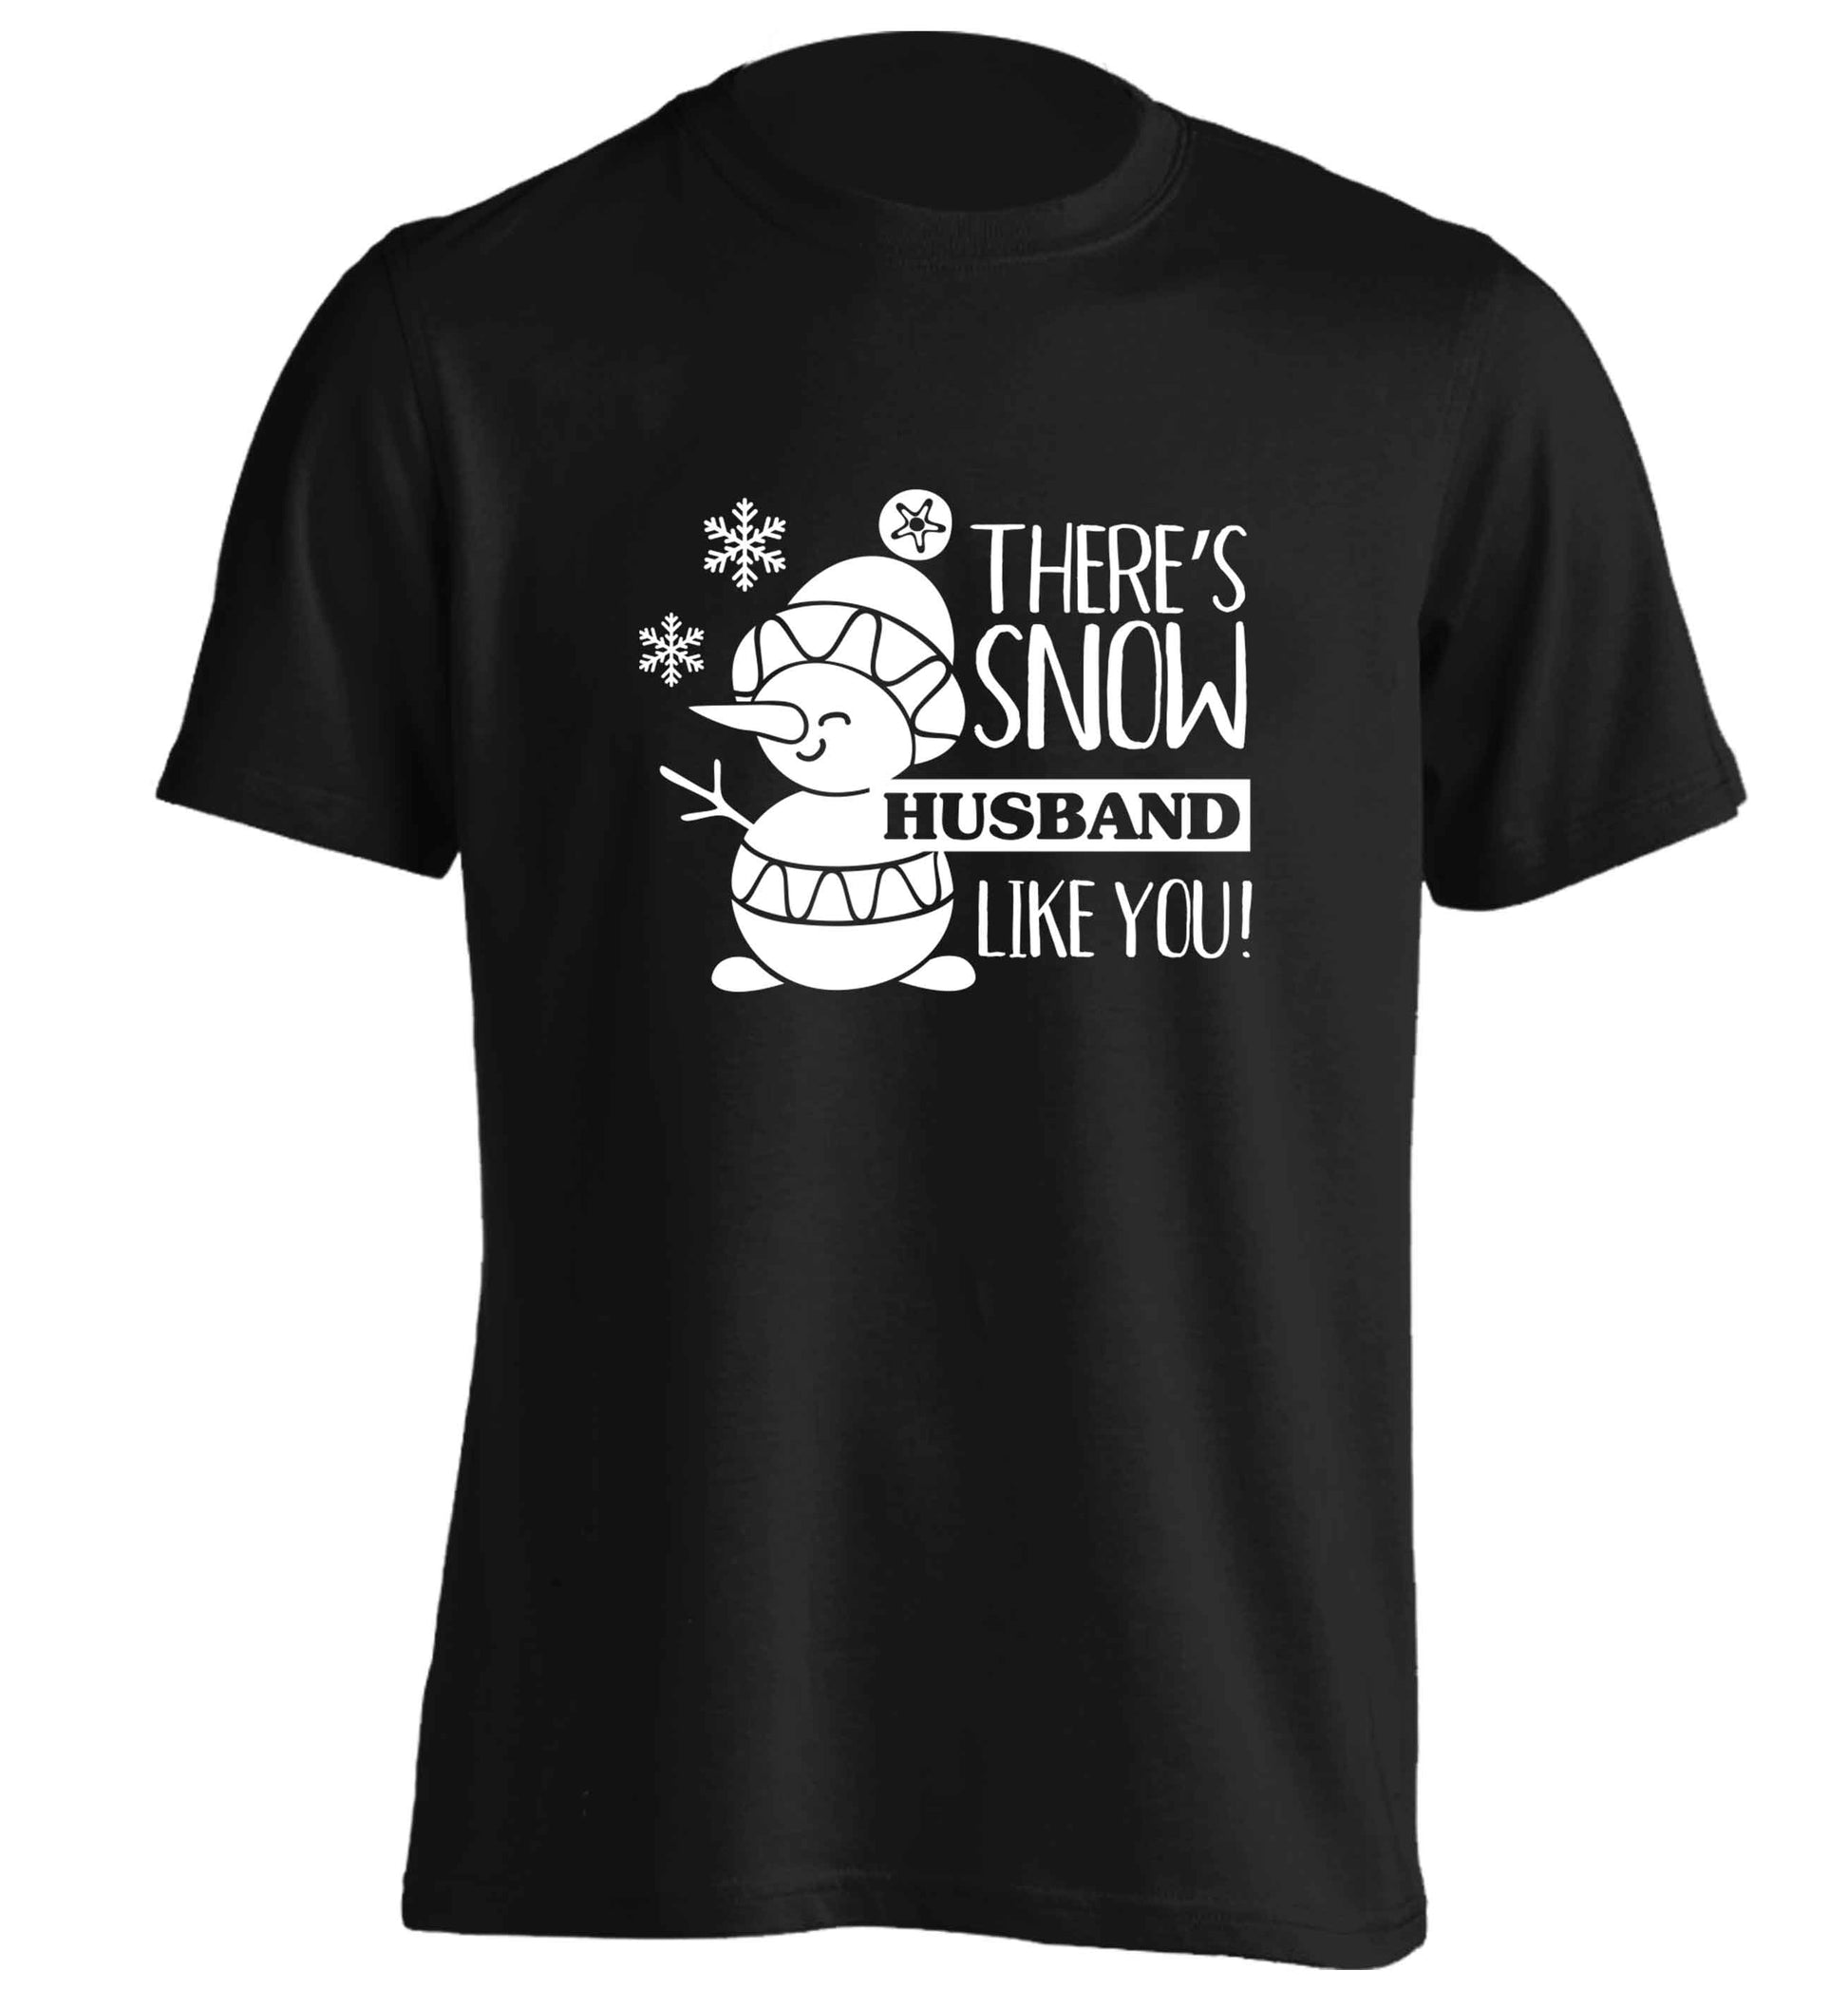 There's snow husband like you adults unisex black Tshirt 2XL